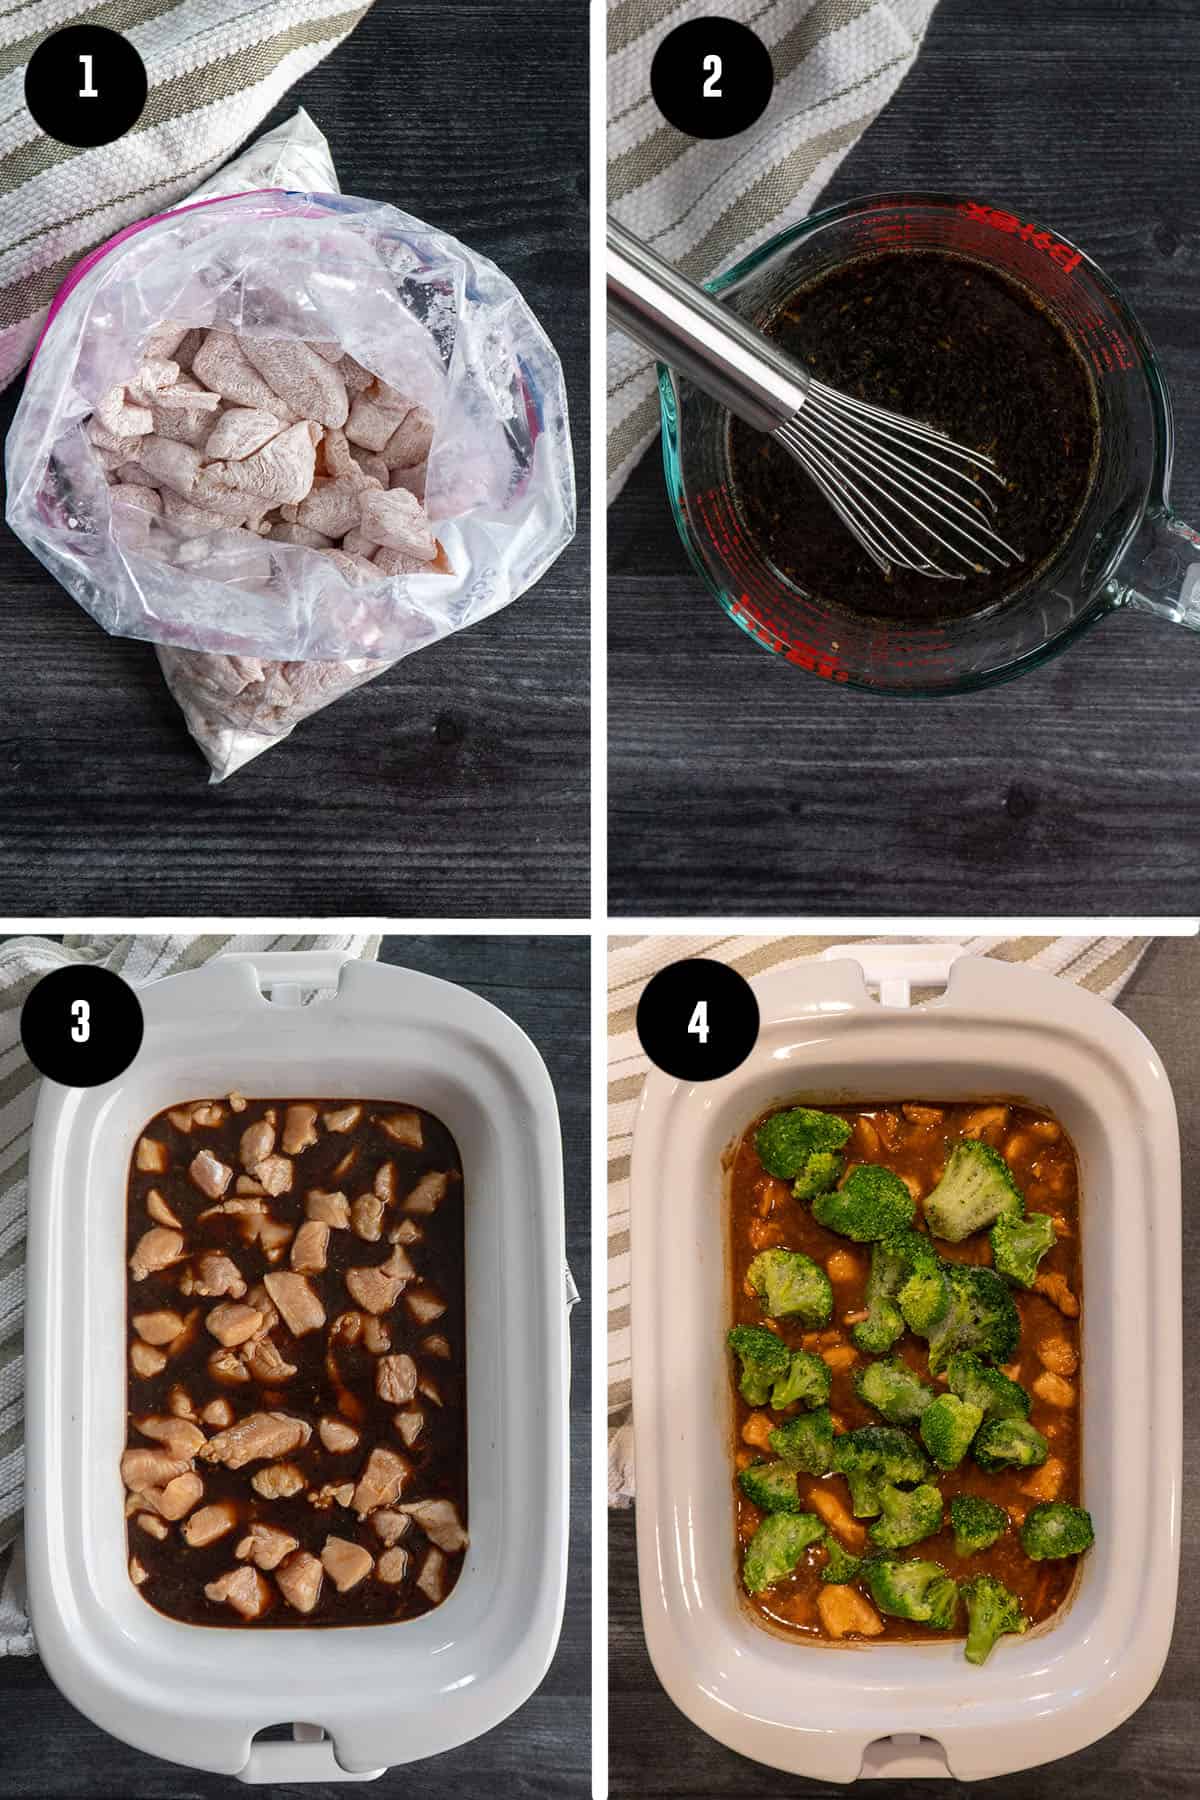 Image of all the steps to make Crock Pot chicken and broccoli.